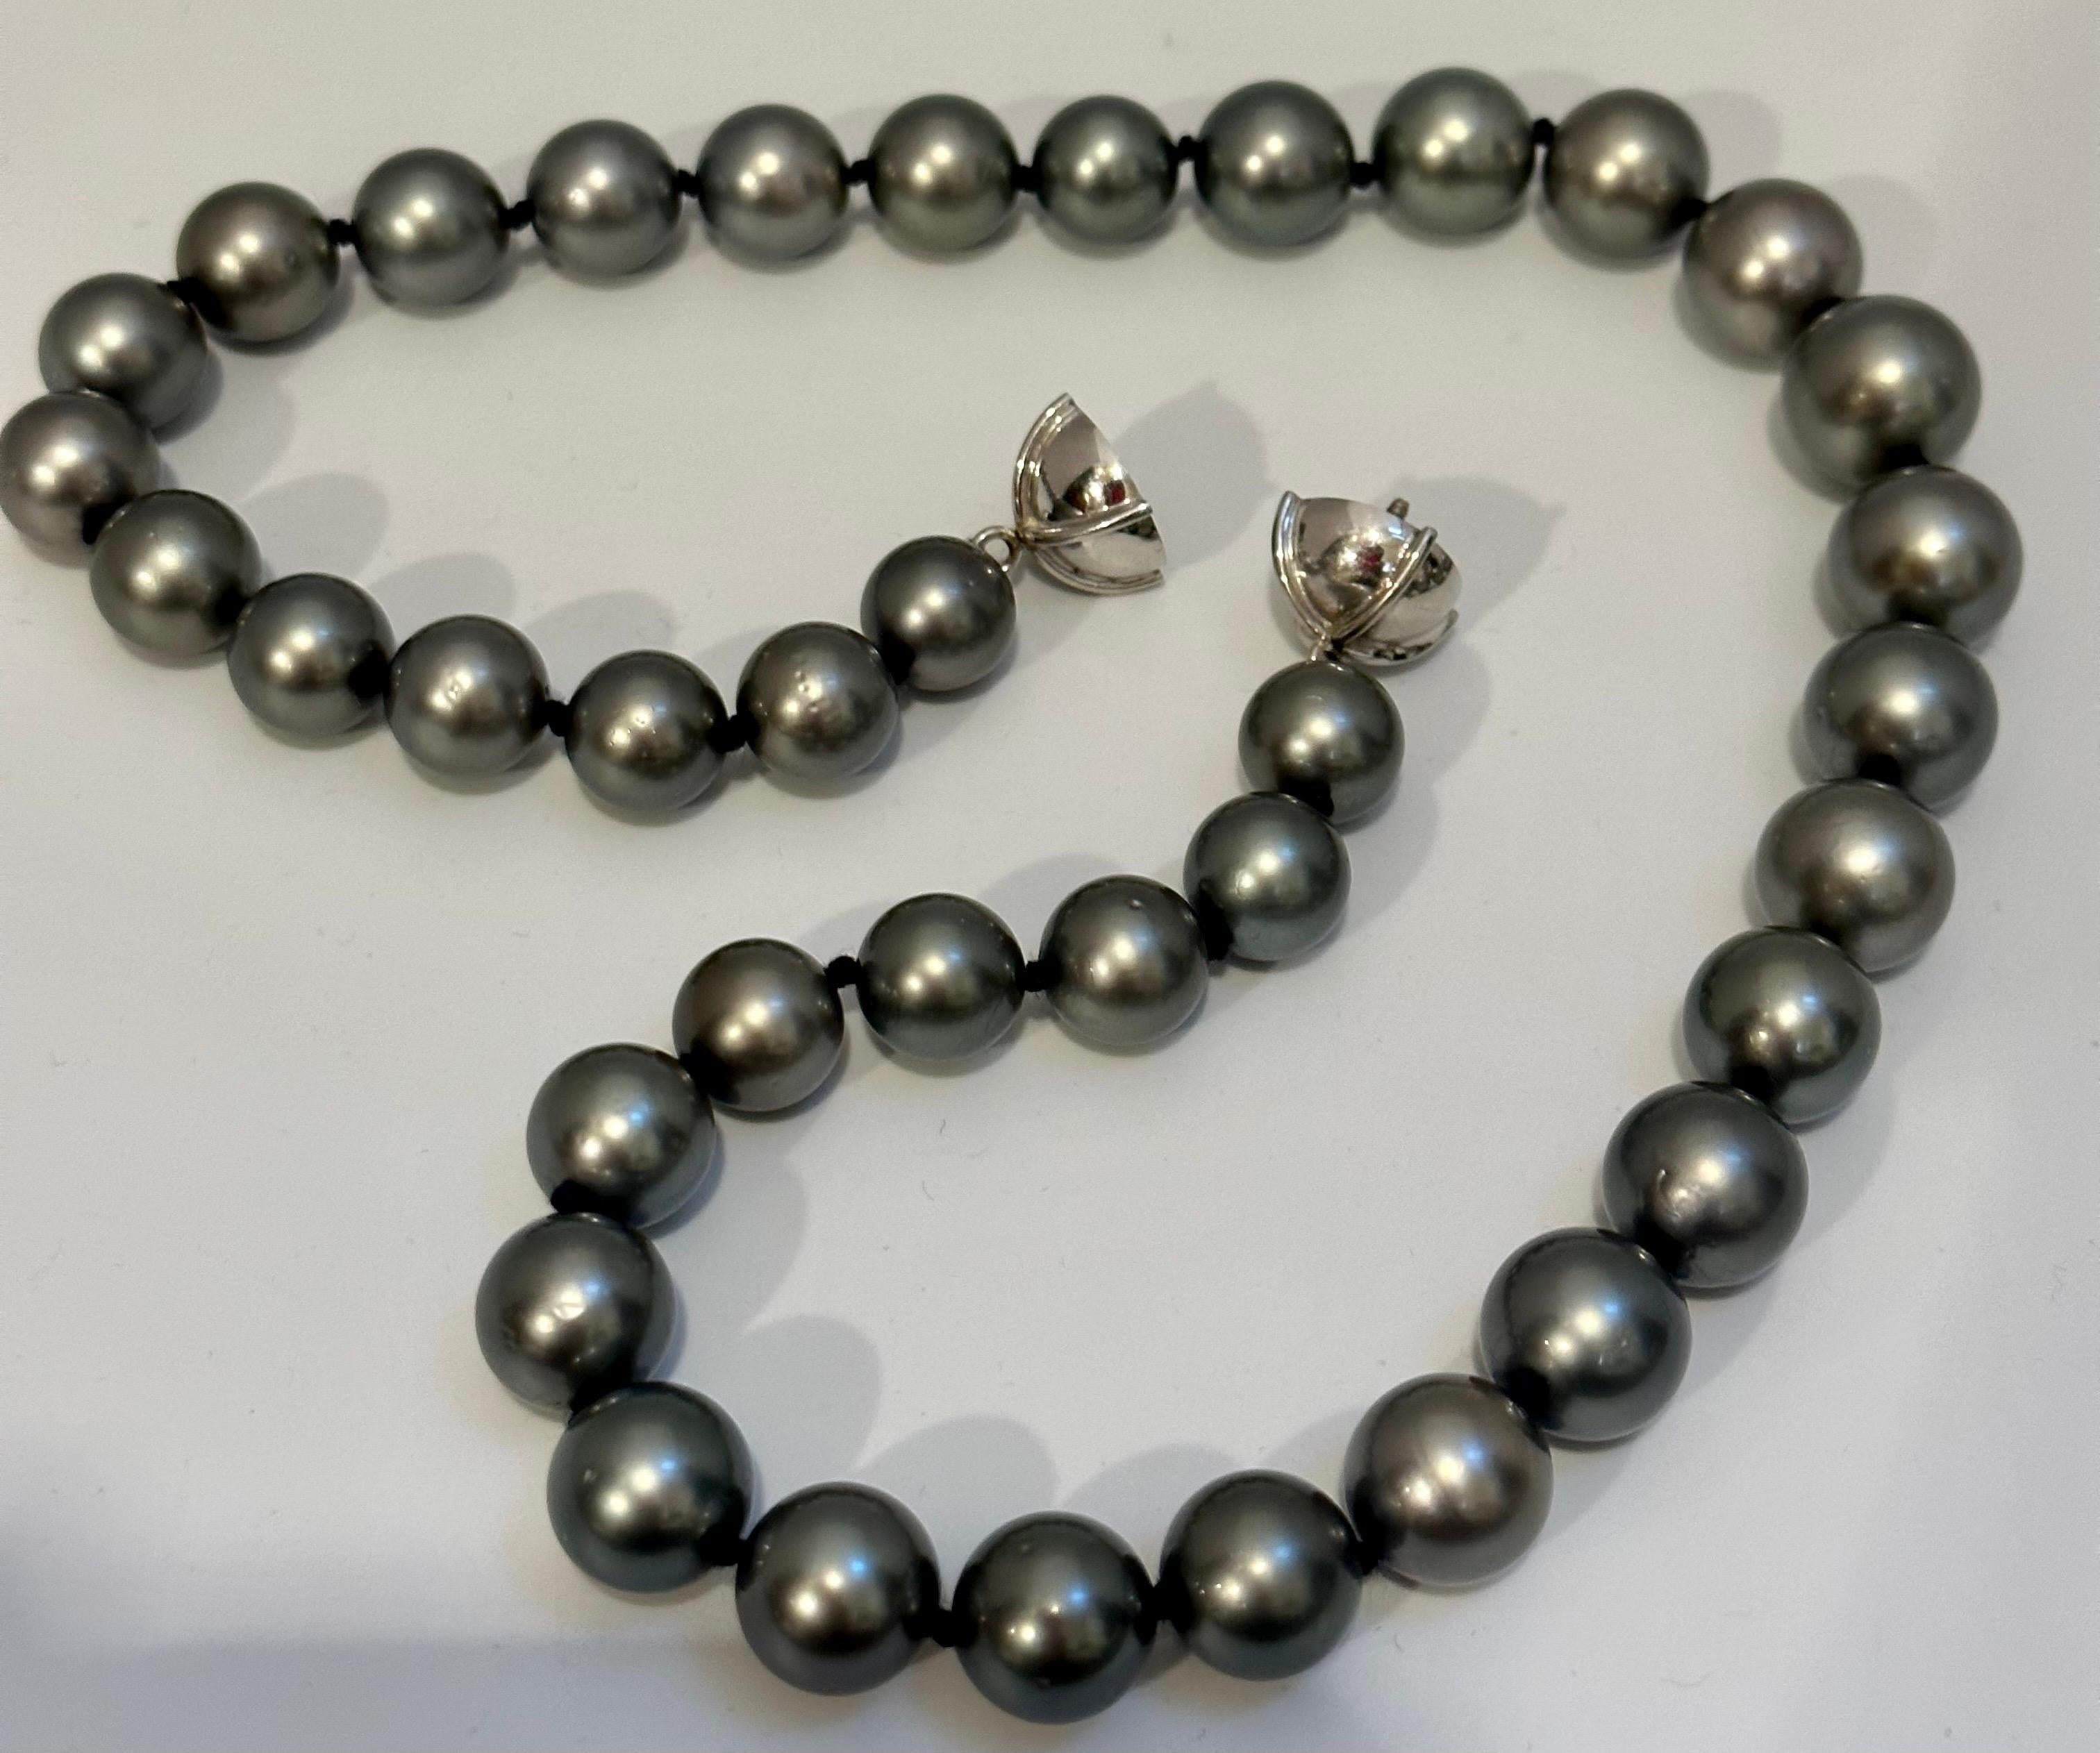 11-15 mm Tahitian Black Graduating Pearls Strand Necklace, Estate, WG In Excellent Condition For Sale In New York, NY